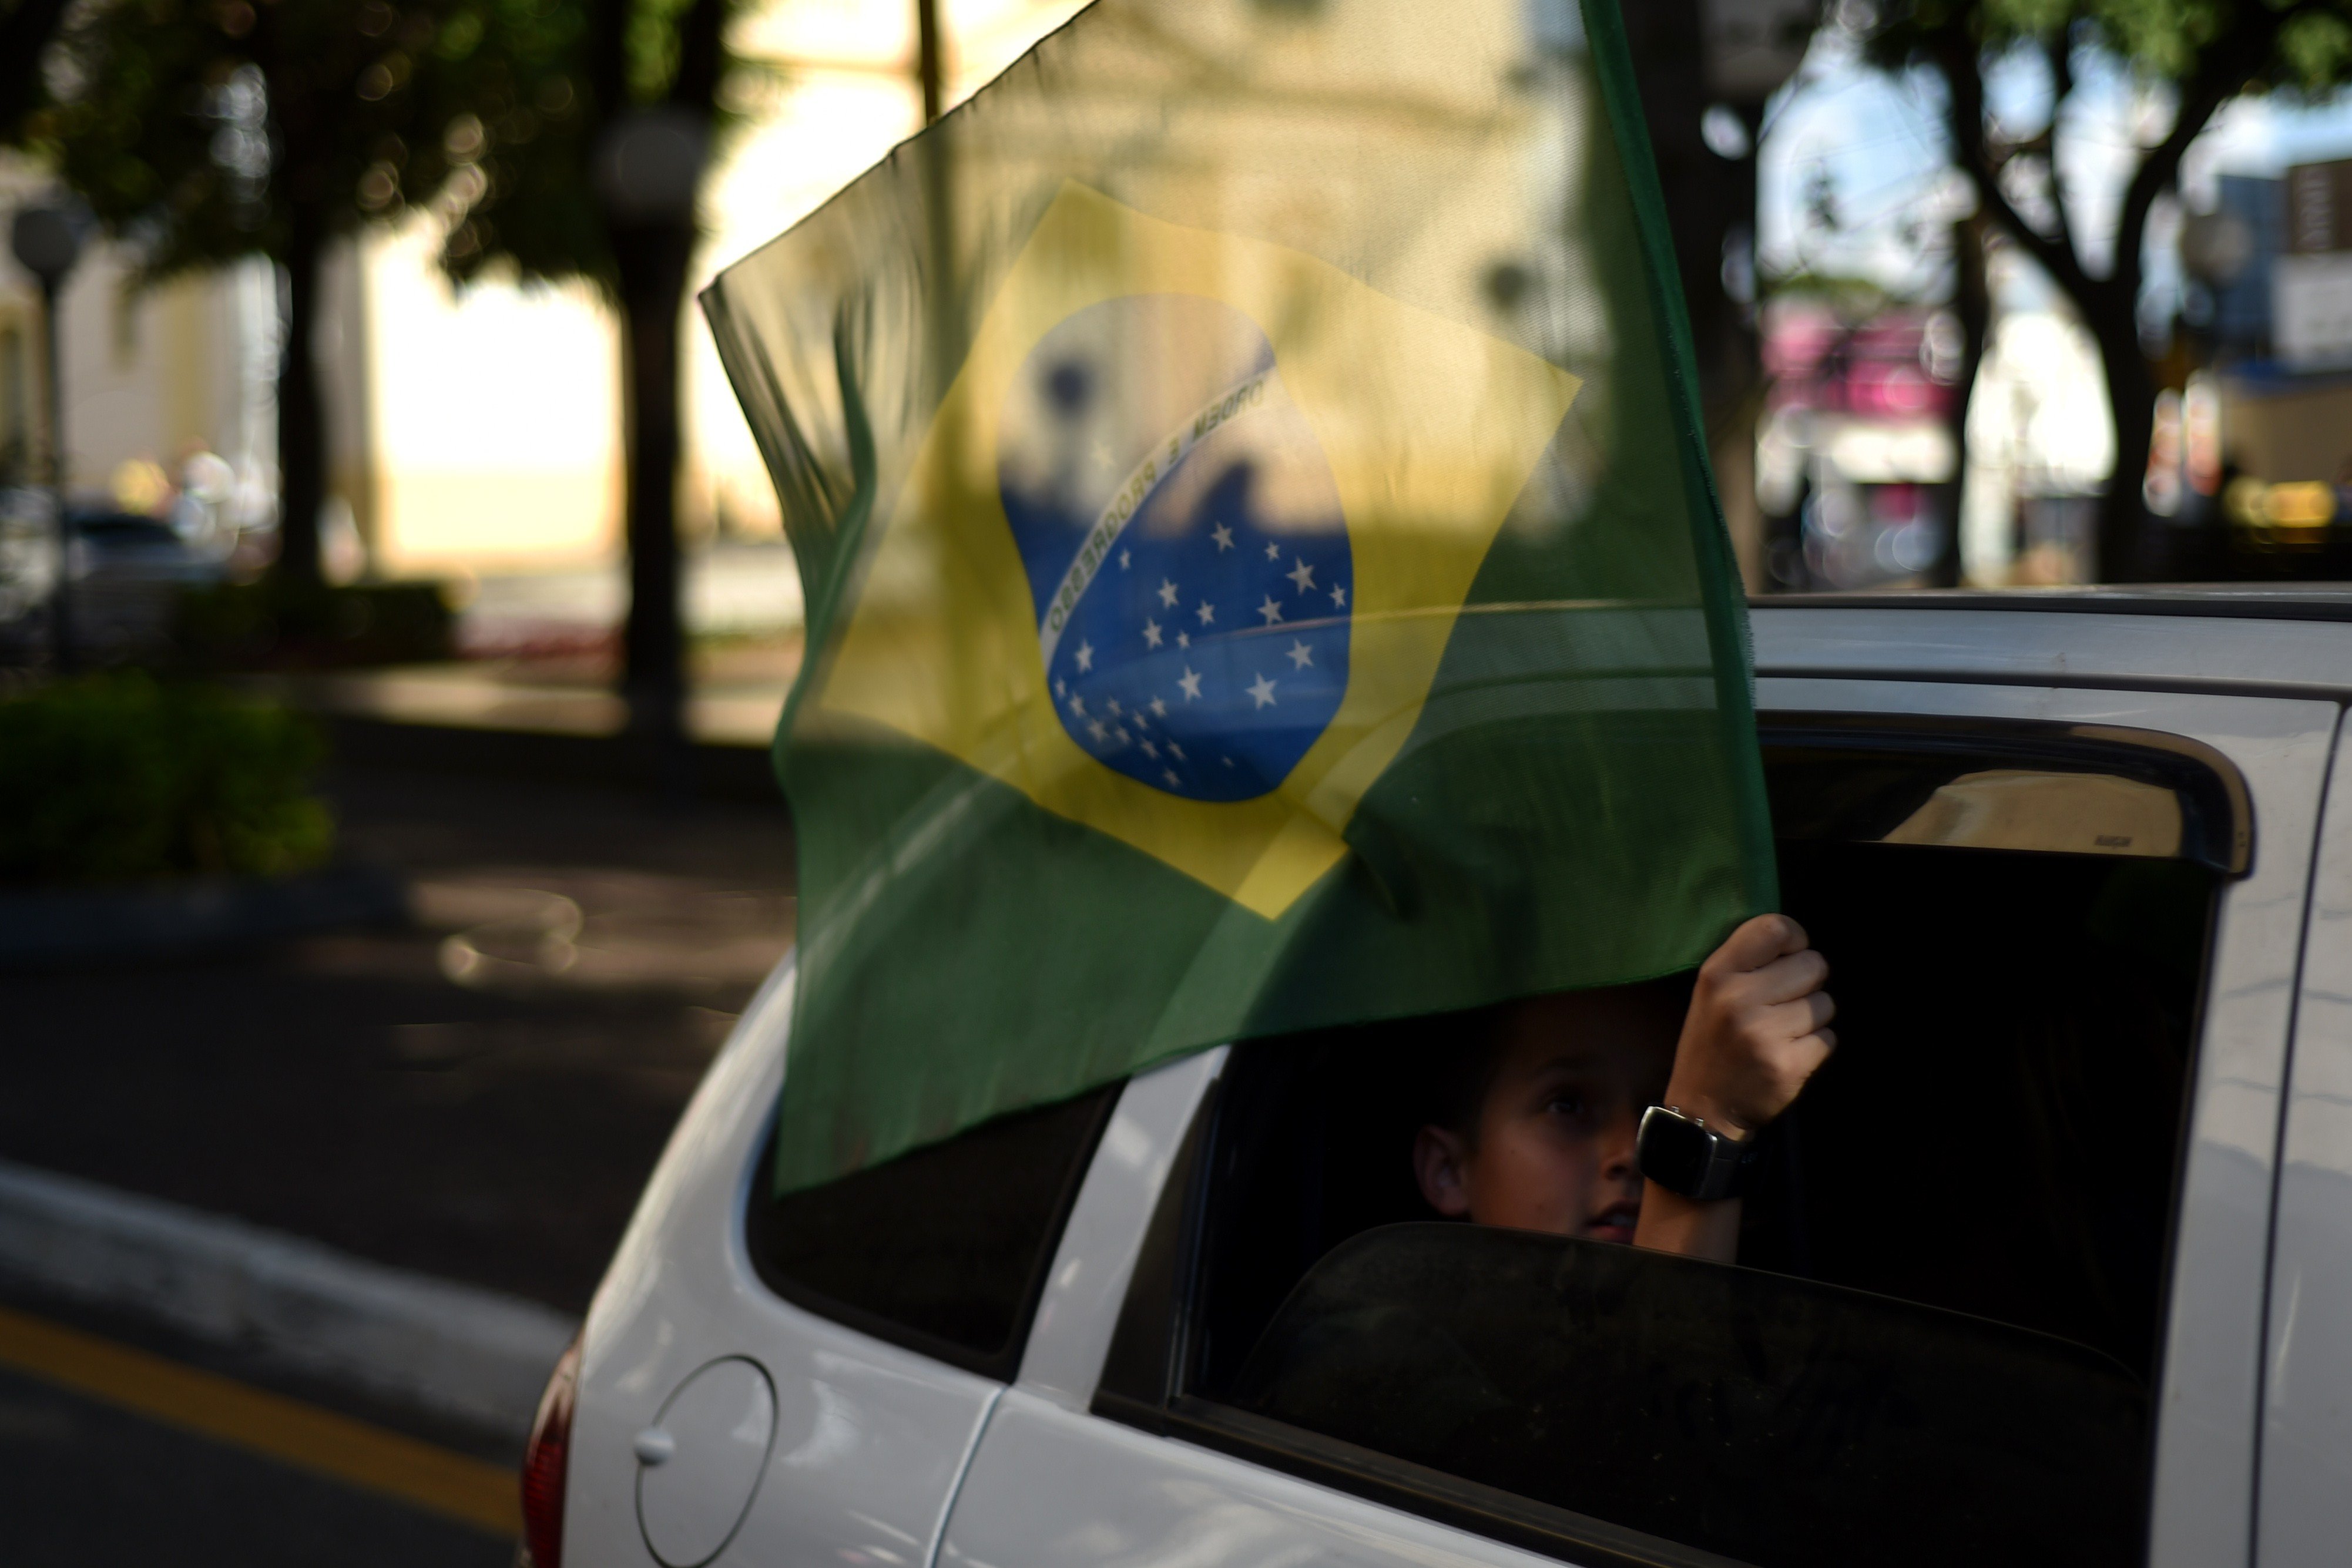 A supportersof the Brazilian national football team holds a Brazilian flag out of a car window in Itu, Brazil on June 12, 2014.